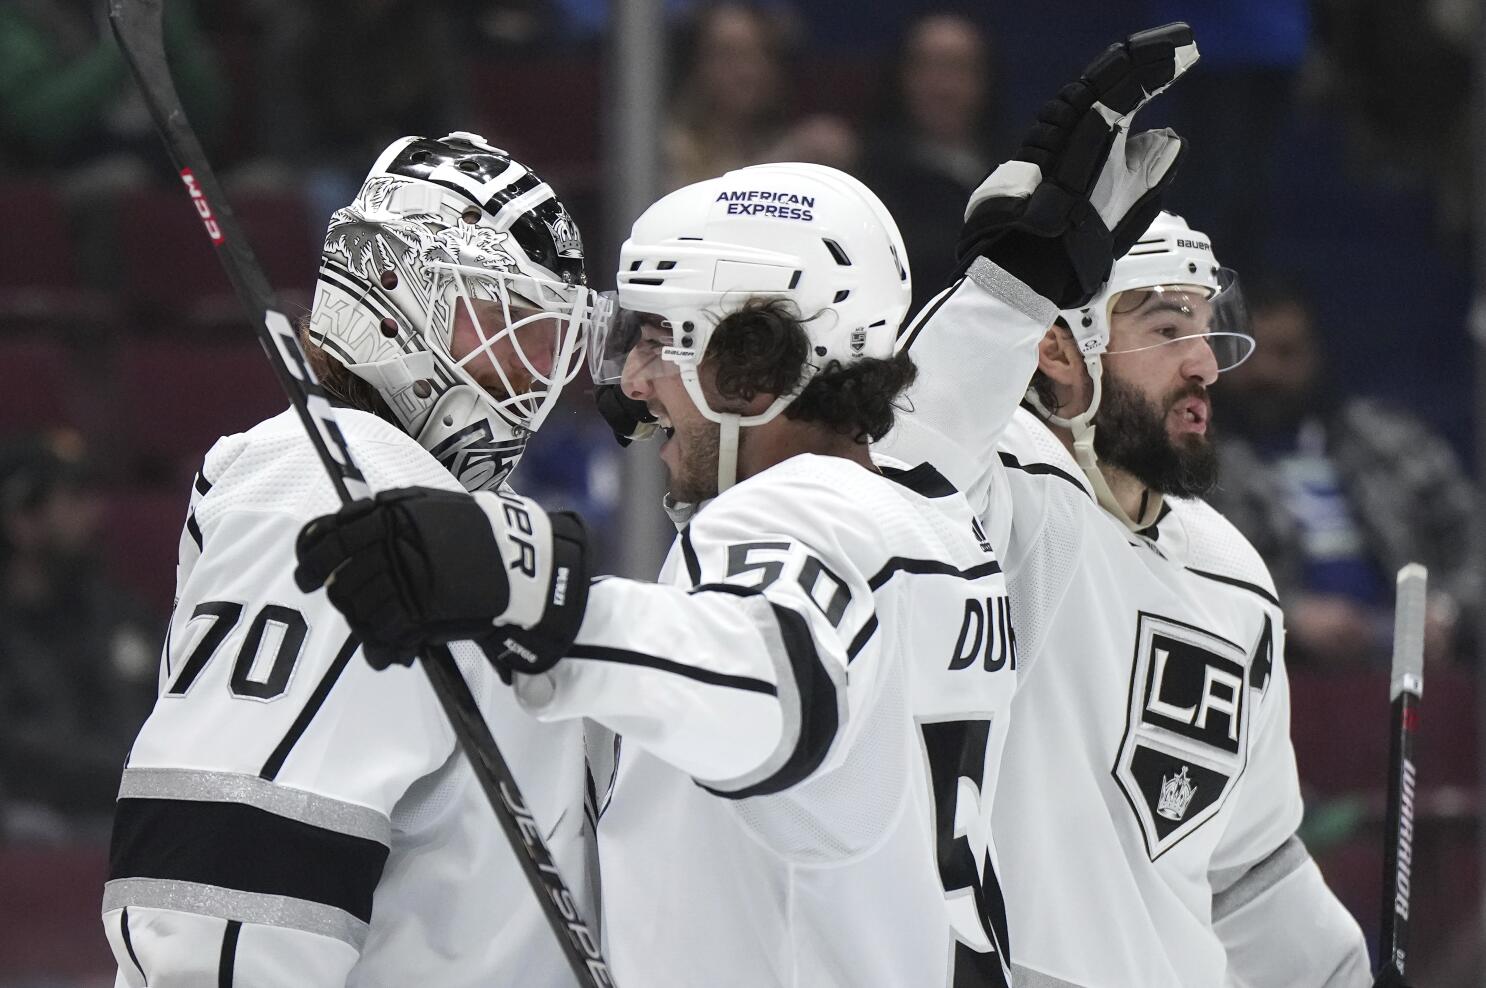 Joonas Korpisalo of the Los Angeles Kings protects the goal during